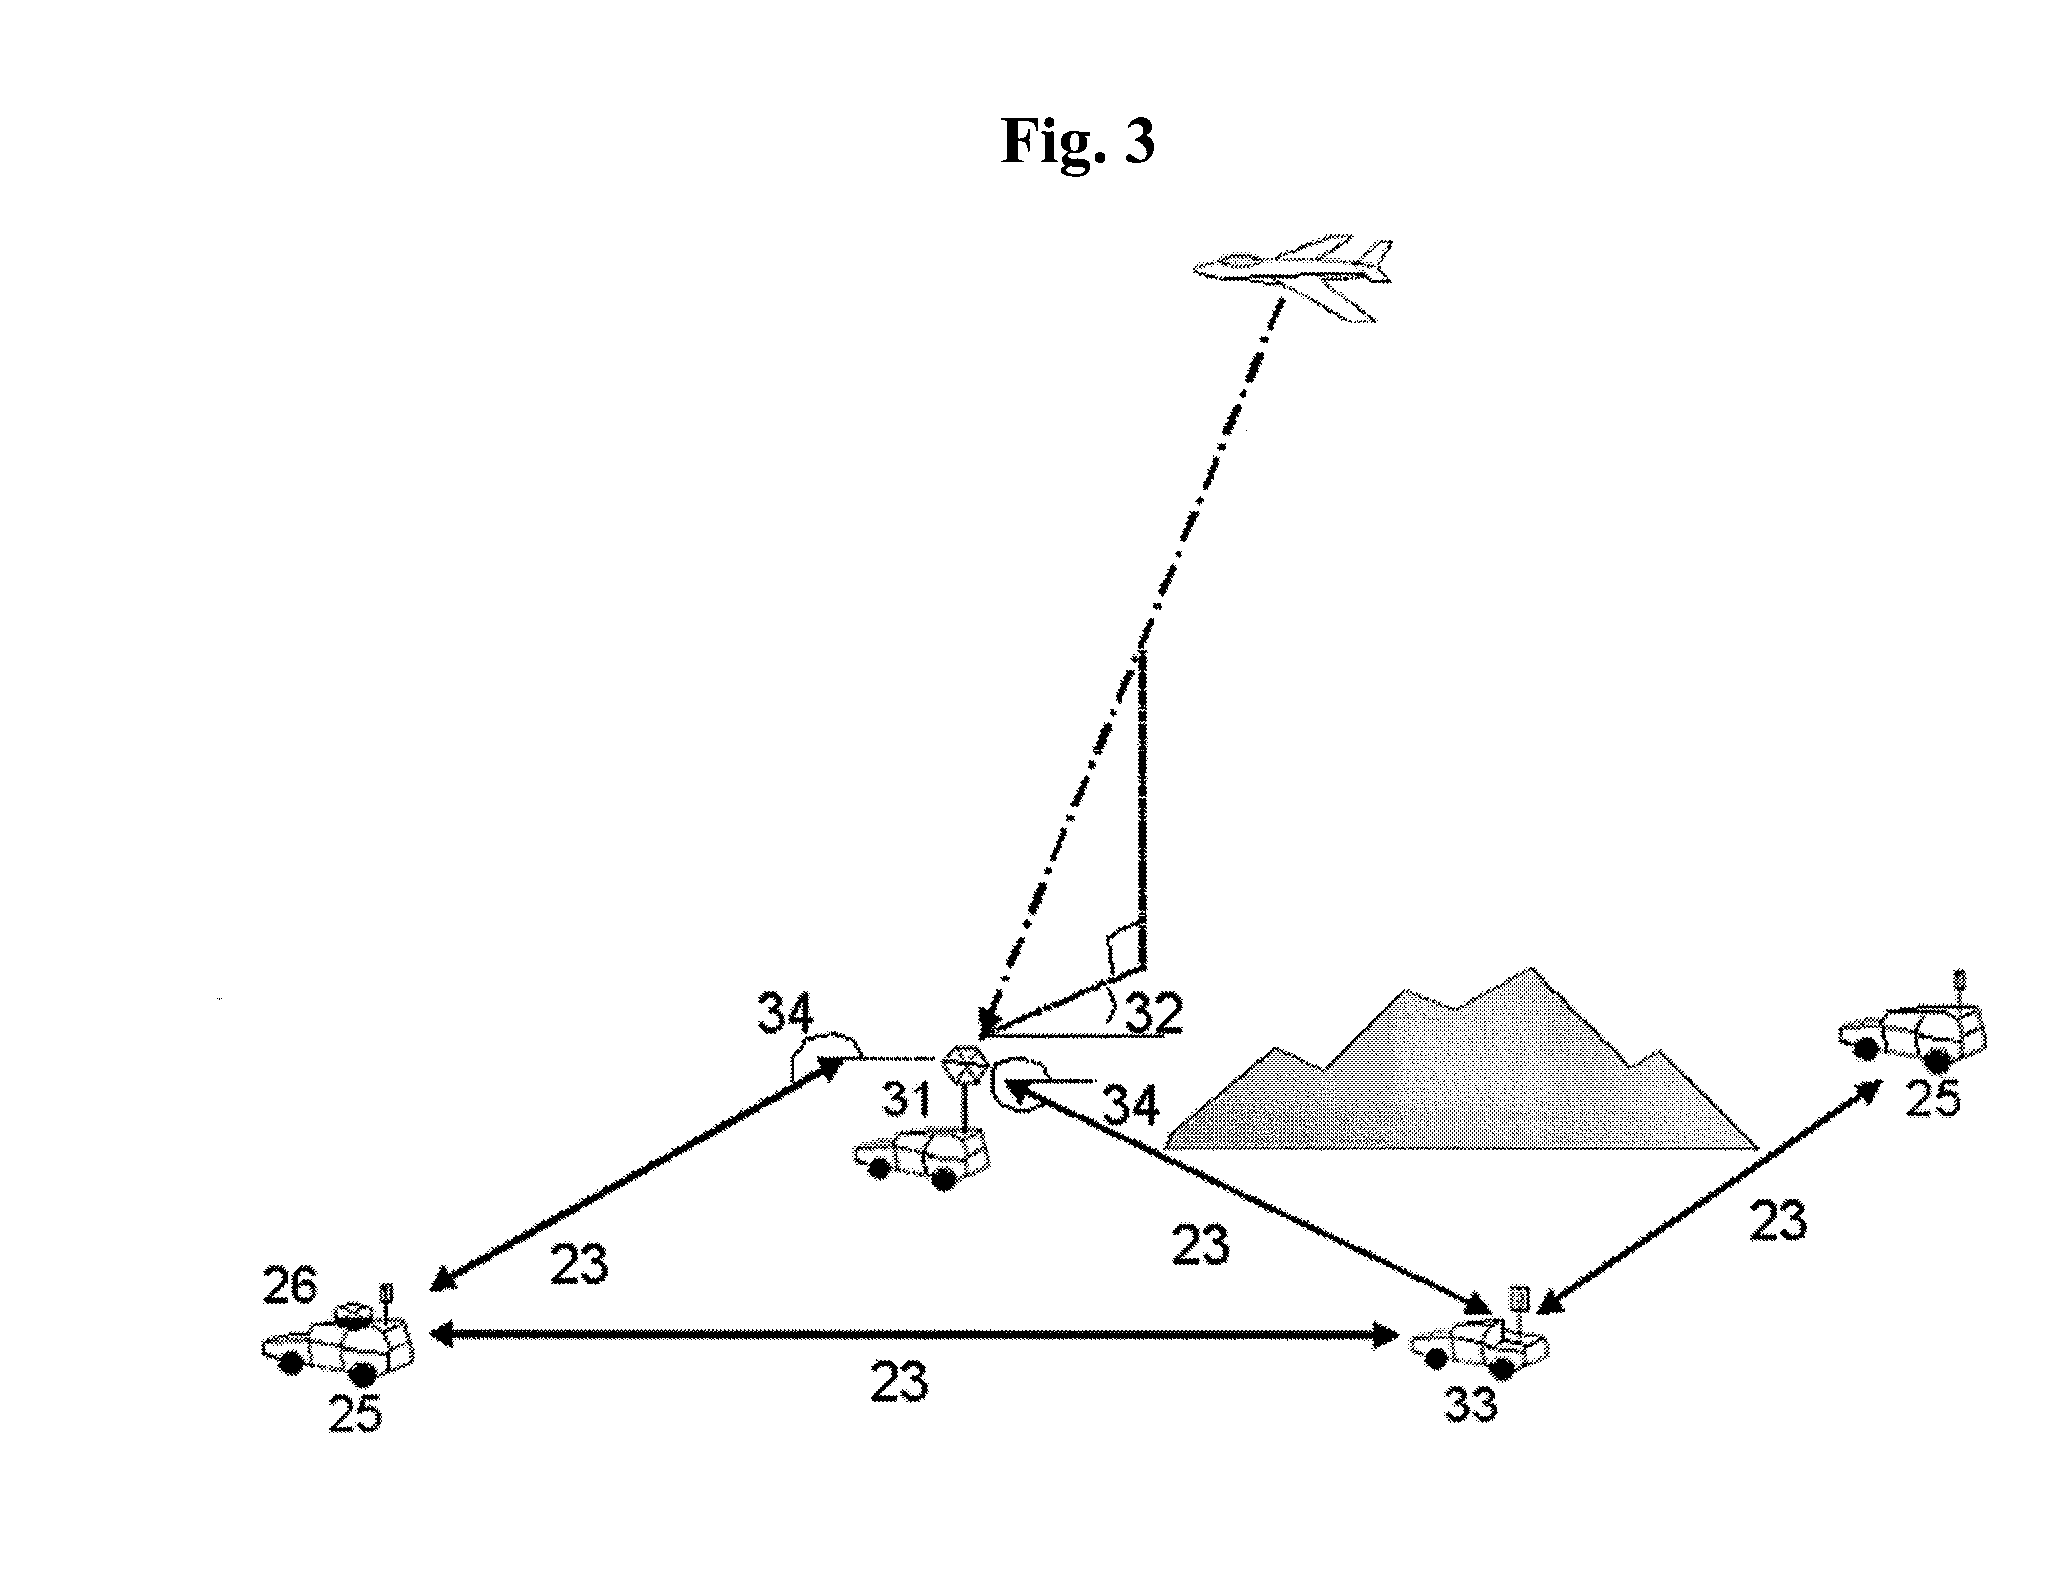 System and method for multilaterating a position of a target using mobile remote receiving units